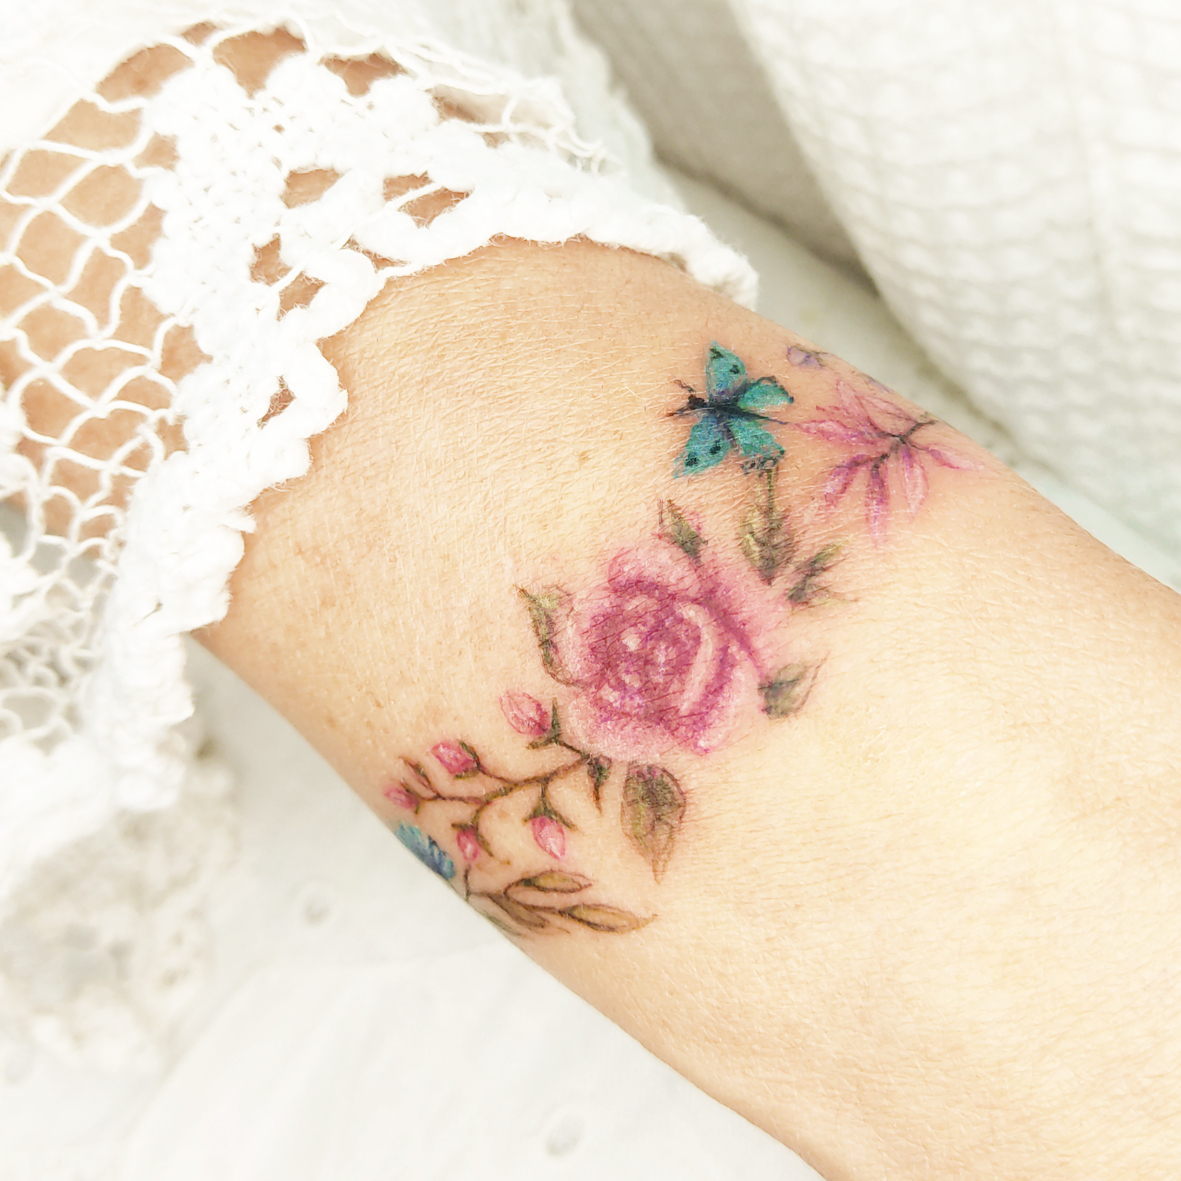 Tattoo tagged with: flower, rose, nature, temporary, lenafedchenko, poppy,  red rose | inked-app.com